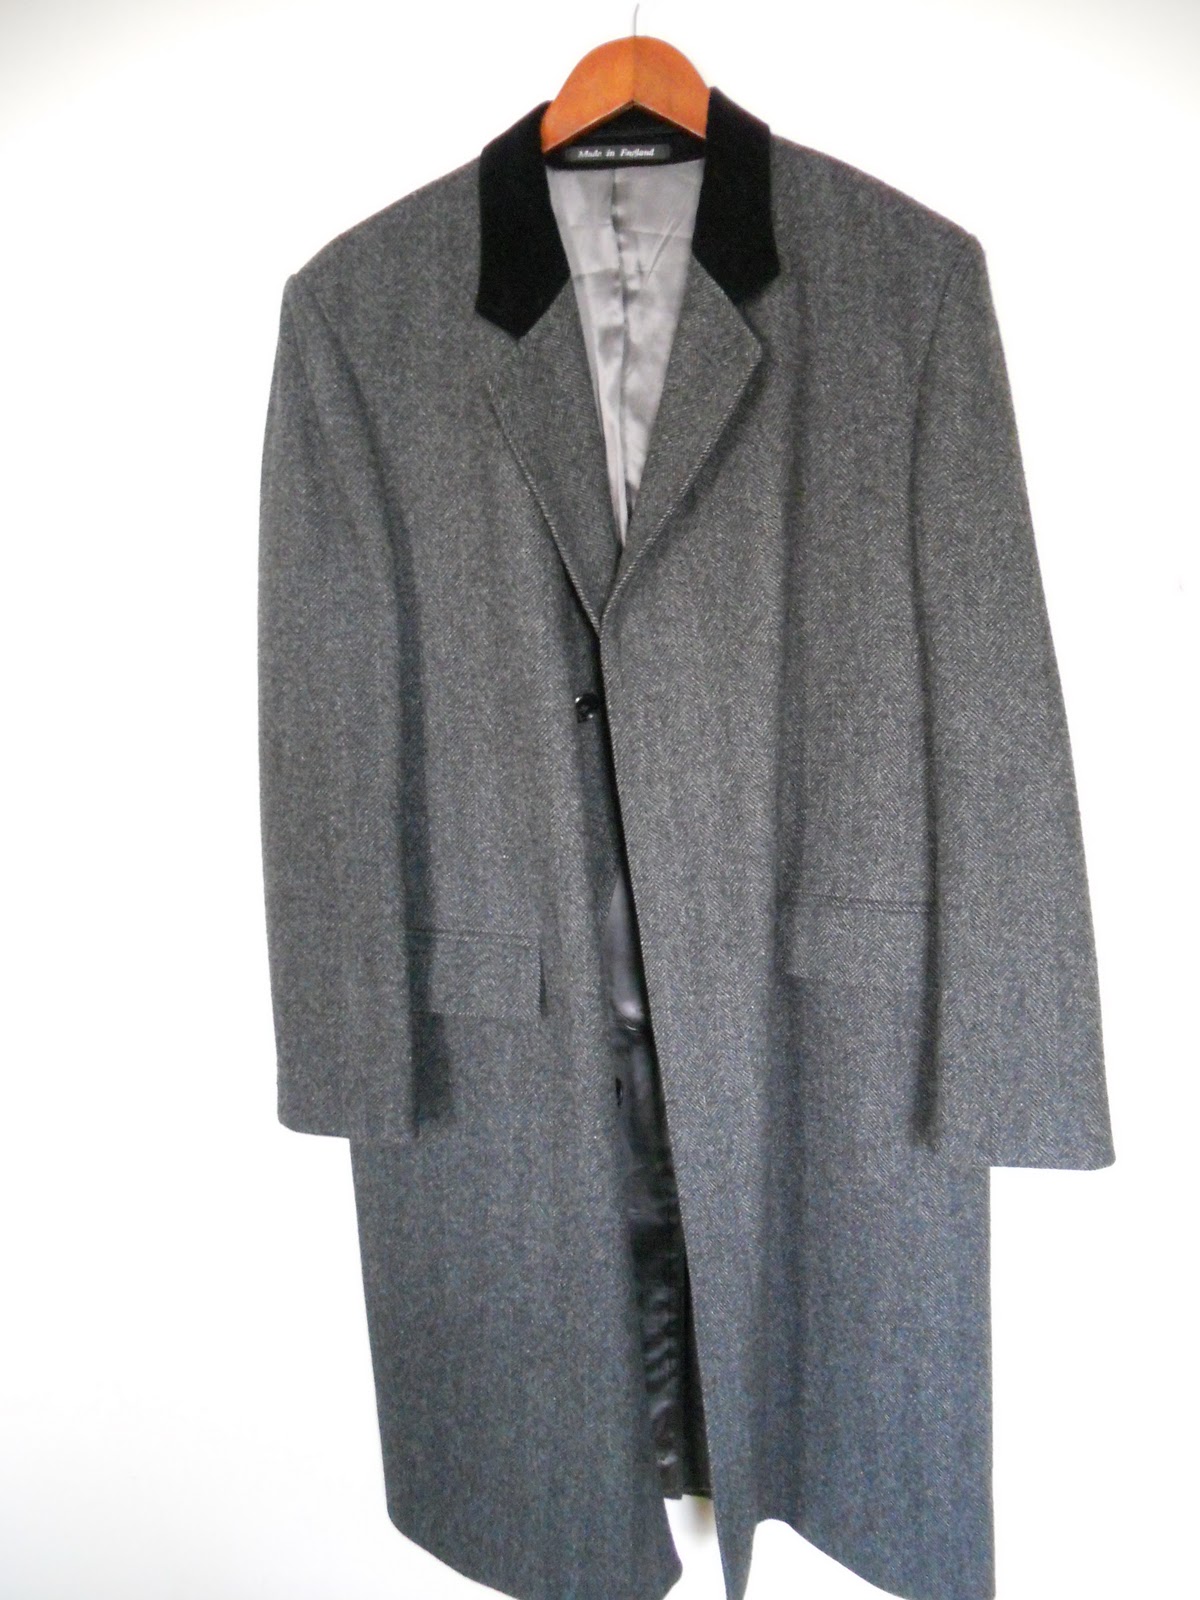 The Pursuits Of A Thrifty Gentleman: Winter Coats Part One: The